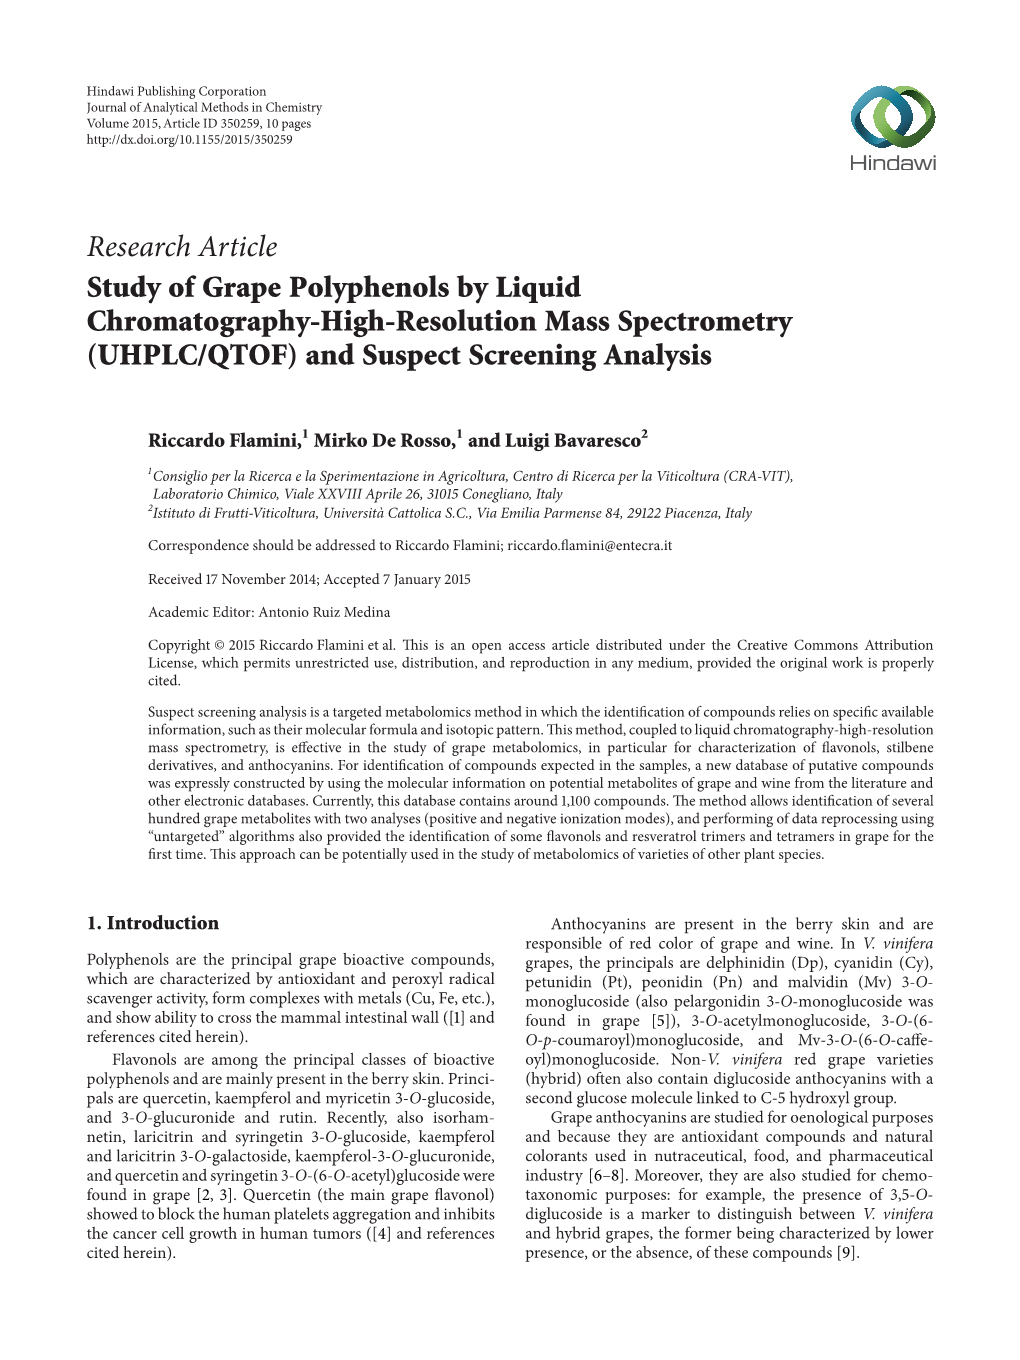 Study of Grape Polyphenols by Liquid Chromatography-High-Resolution Mass Spectrometry (UHPLC/QTOF) and Suspect Screening Analysis